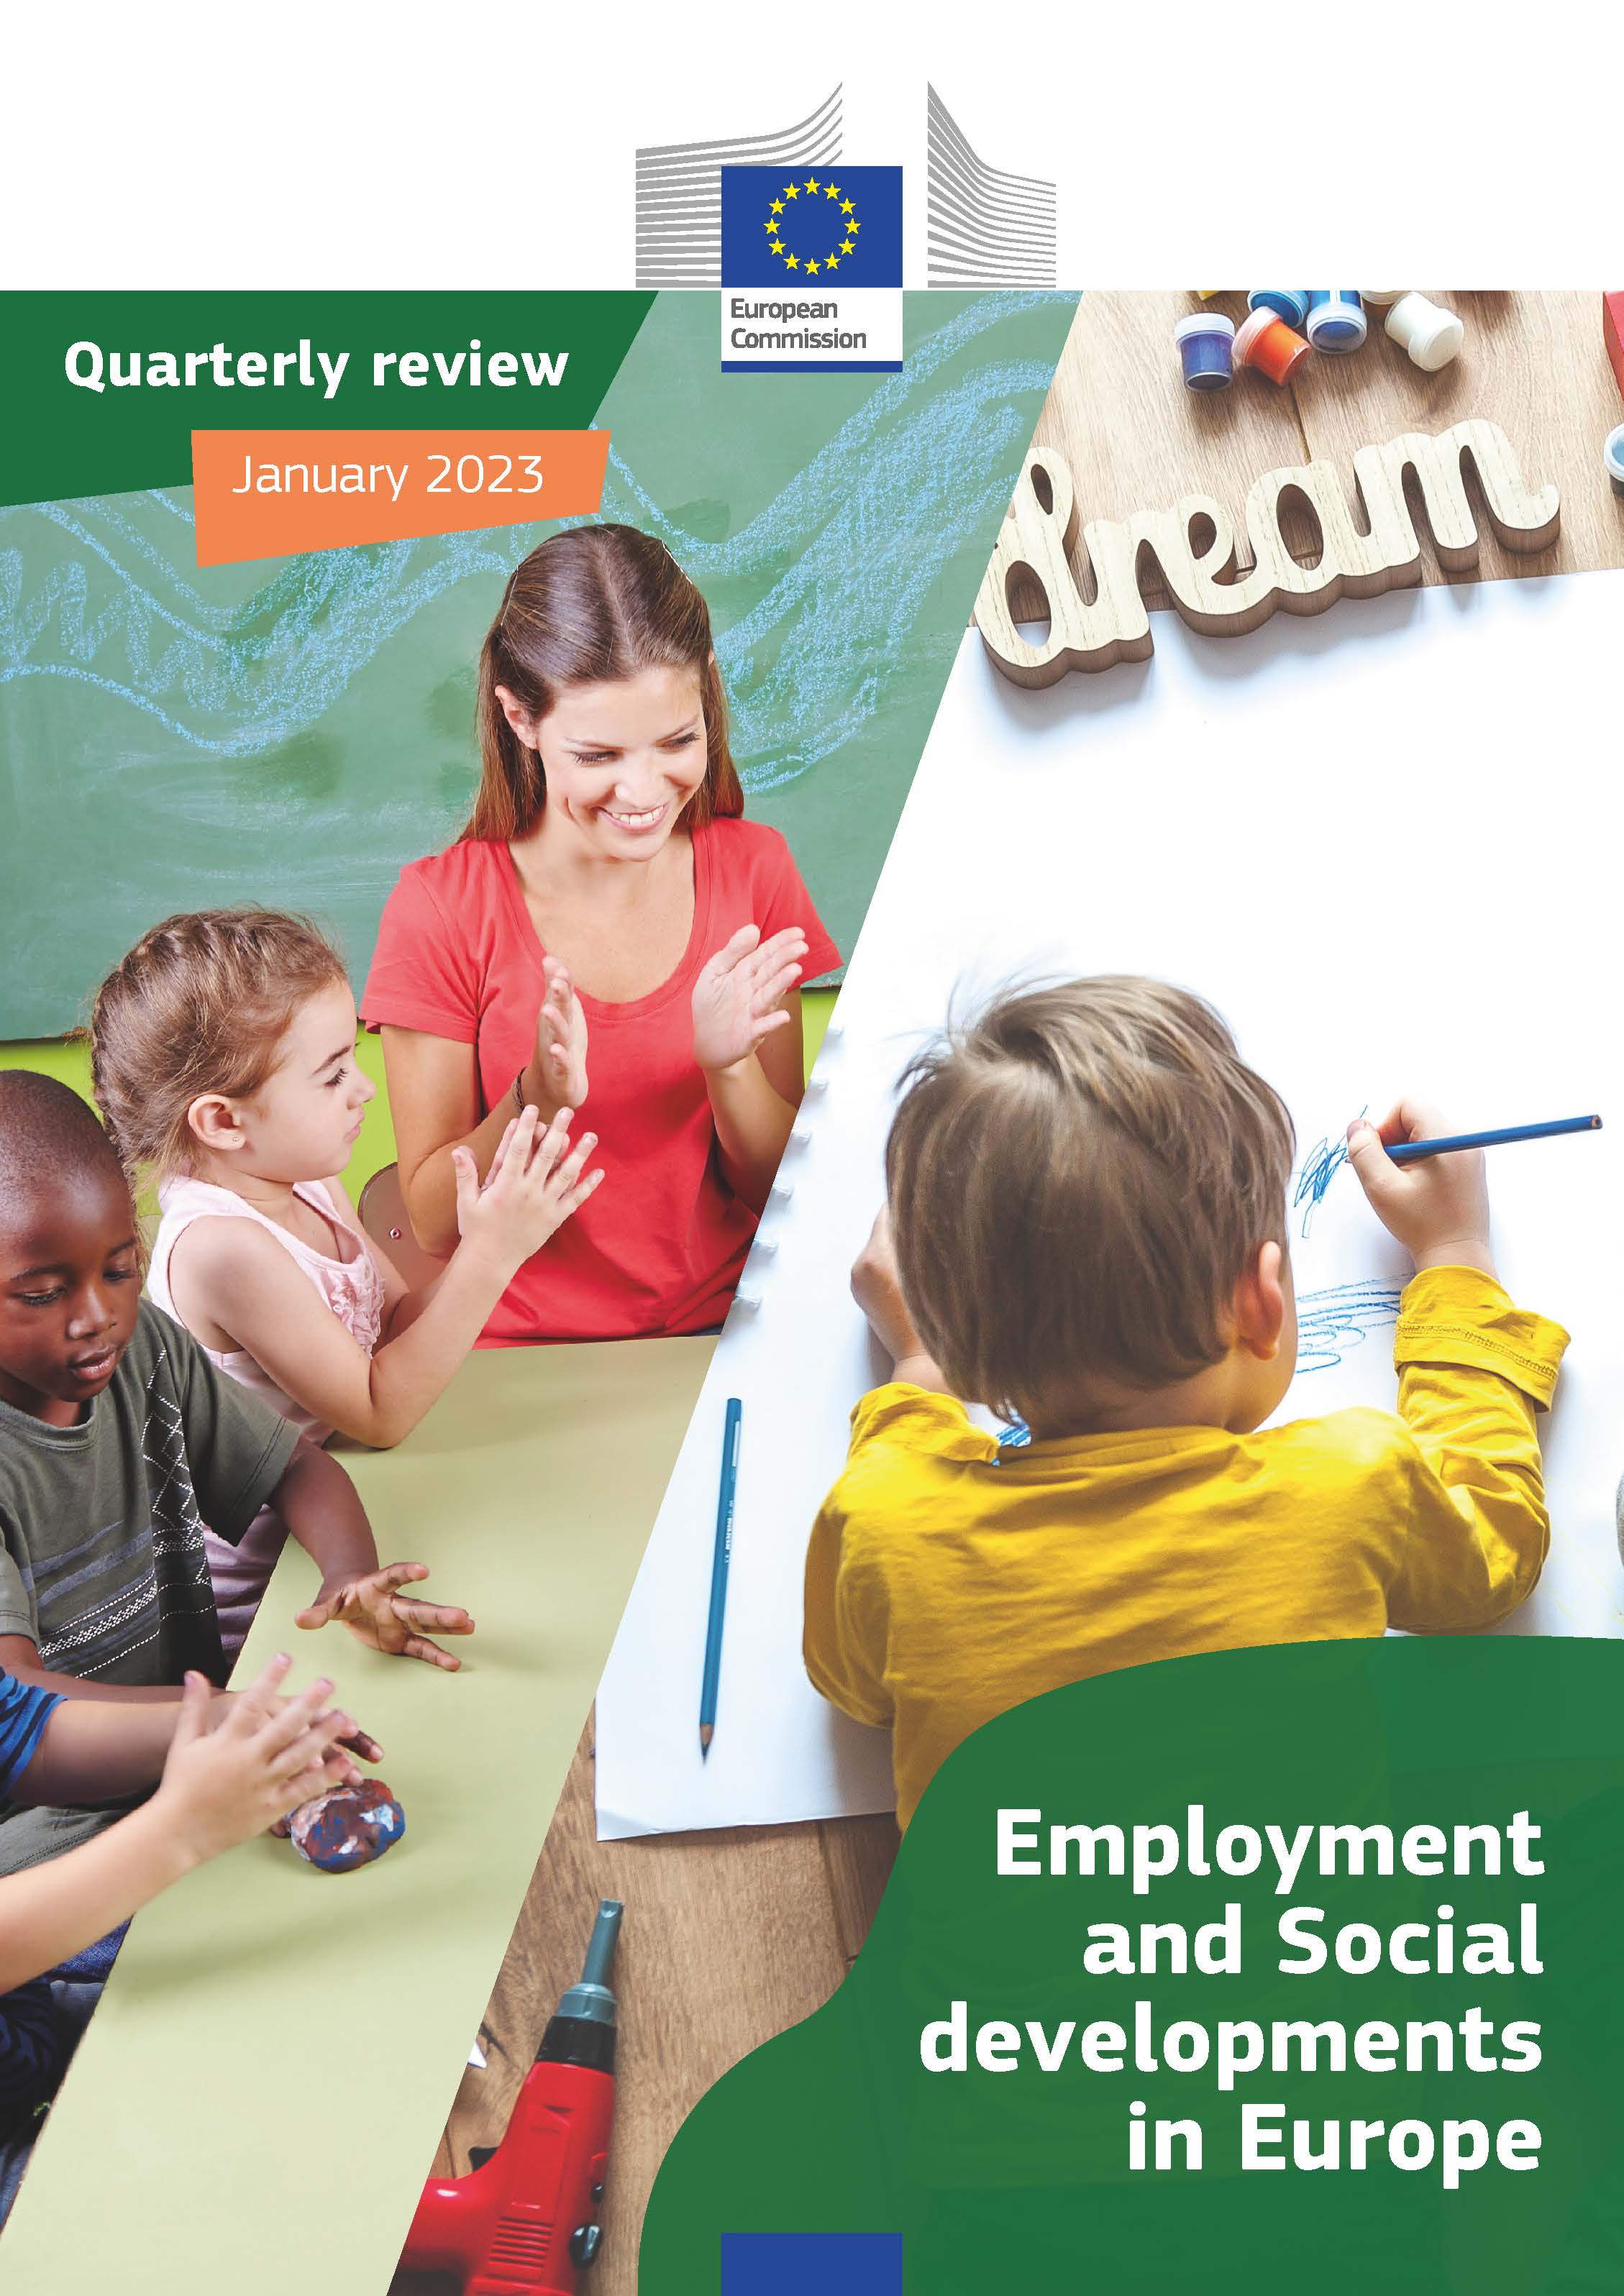 Quarterly Review of Employment and Social Developments in Europe (ESDE) - January 2023